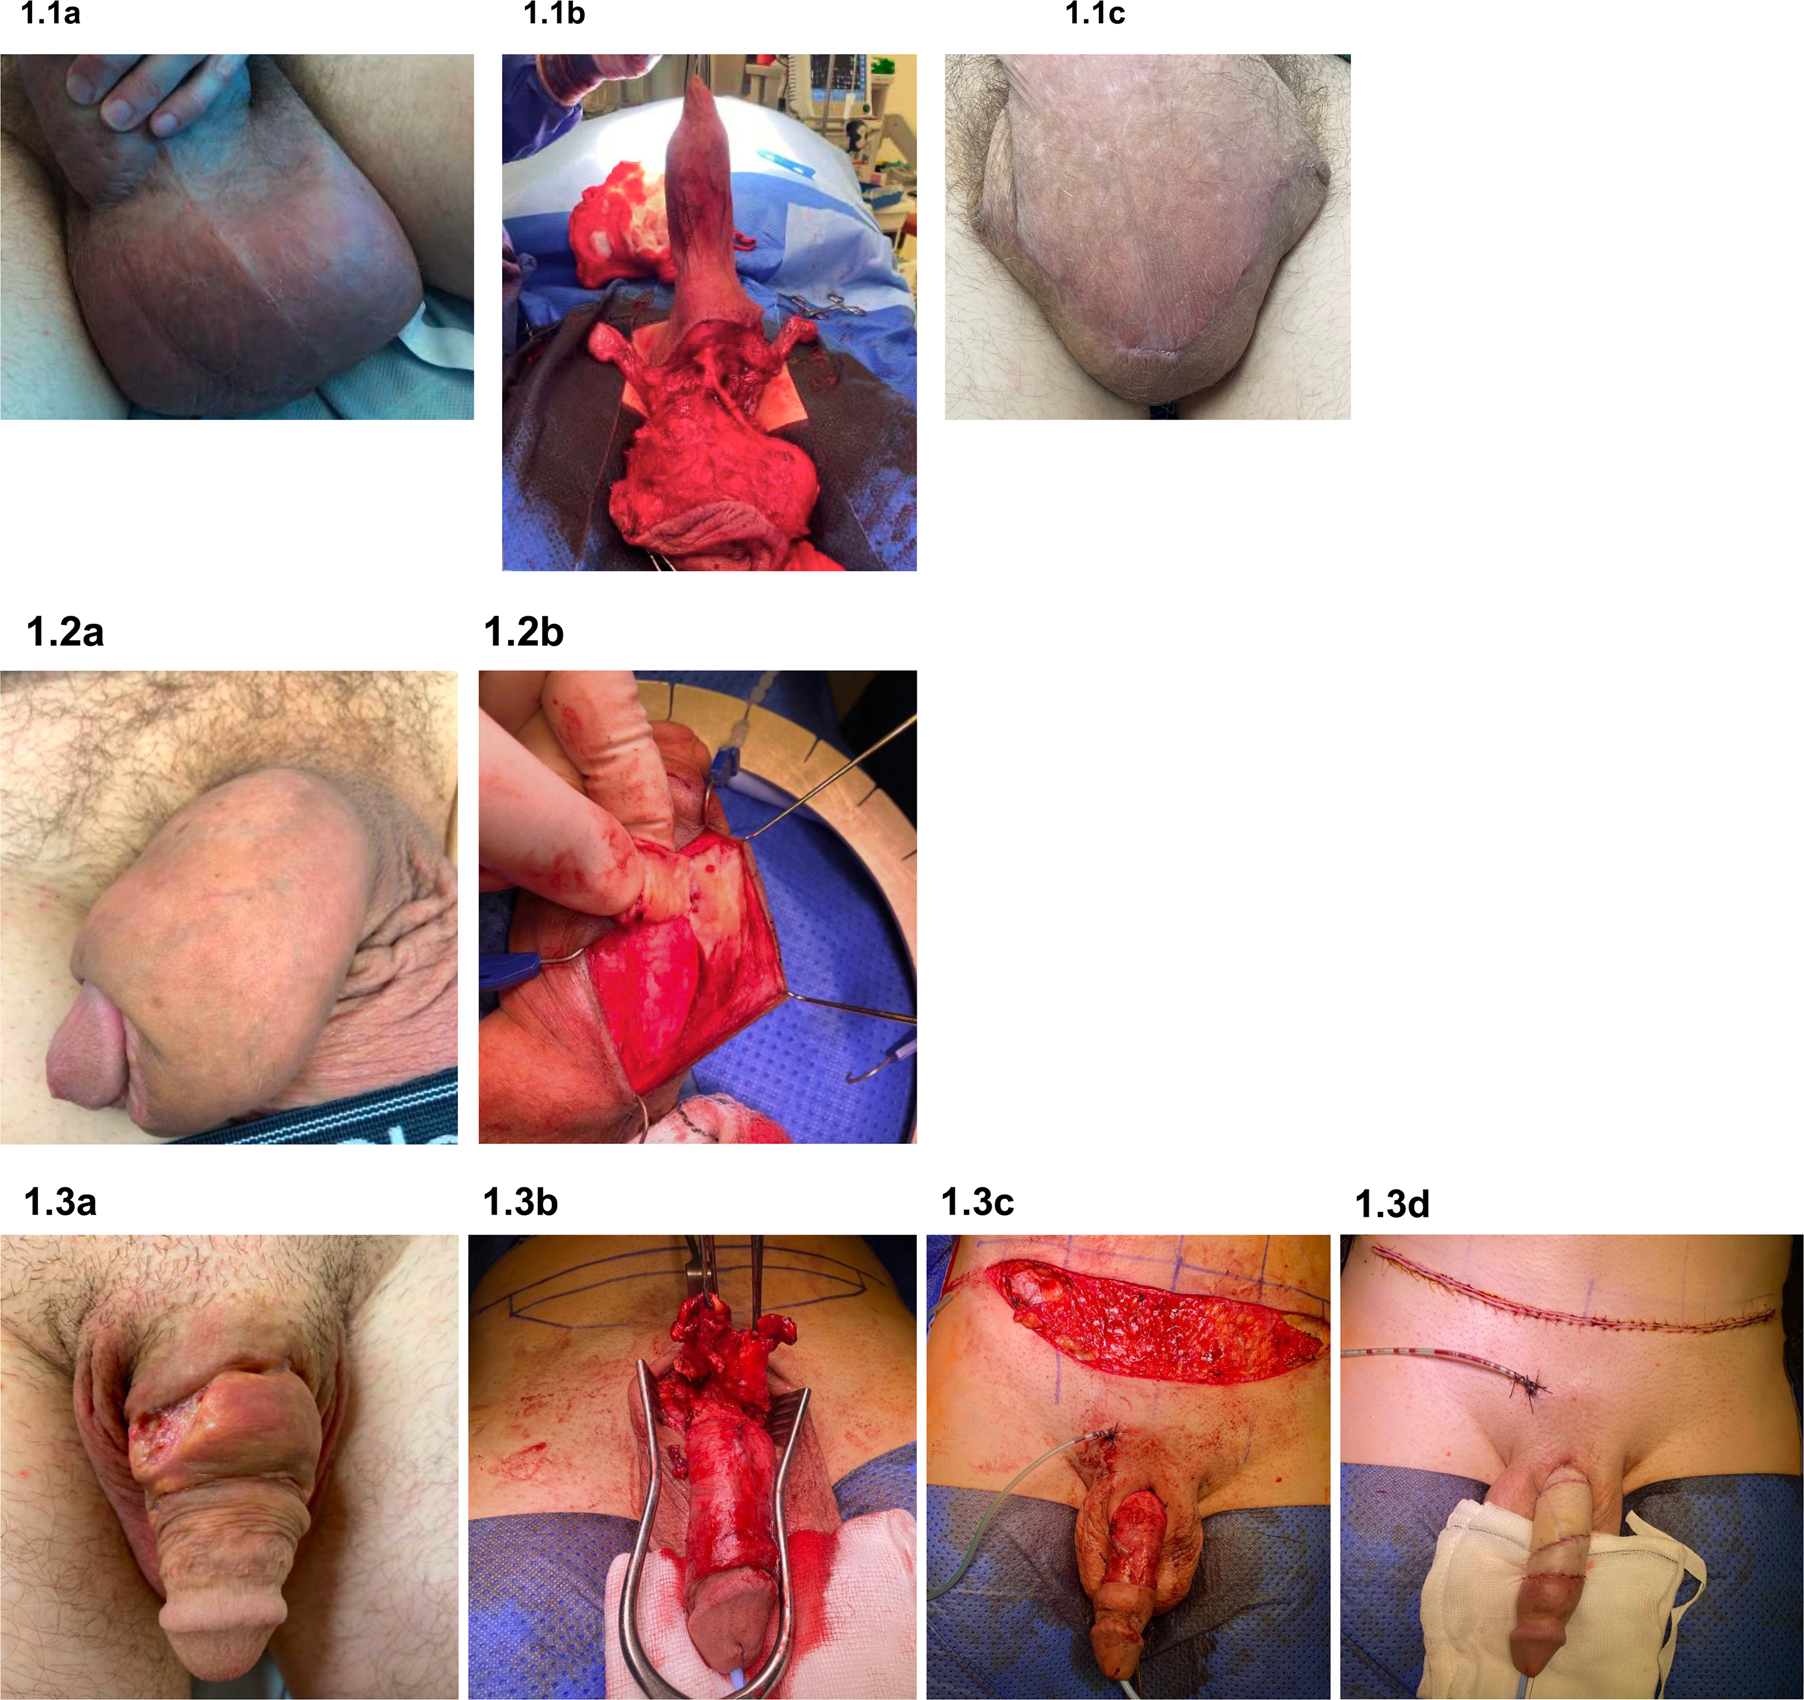 Complications and outcomes following injection of foreign material into the male external genitalia for augmentation a single-centre experience and systematic review International Journal of Impotence Research